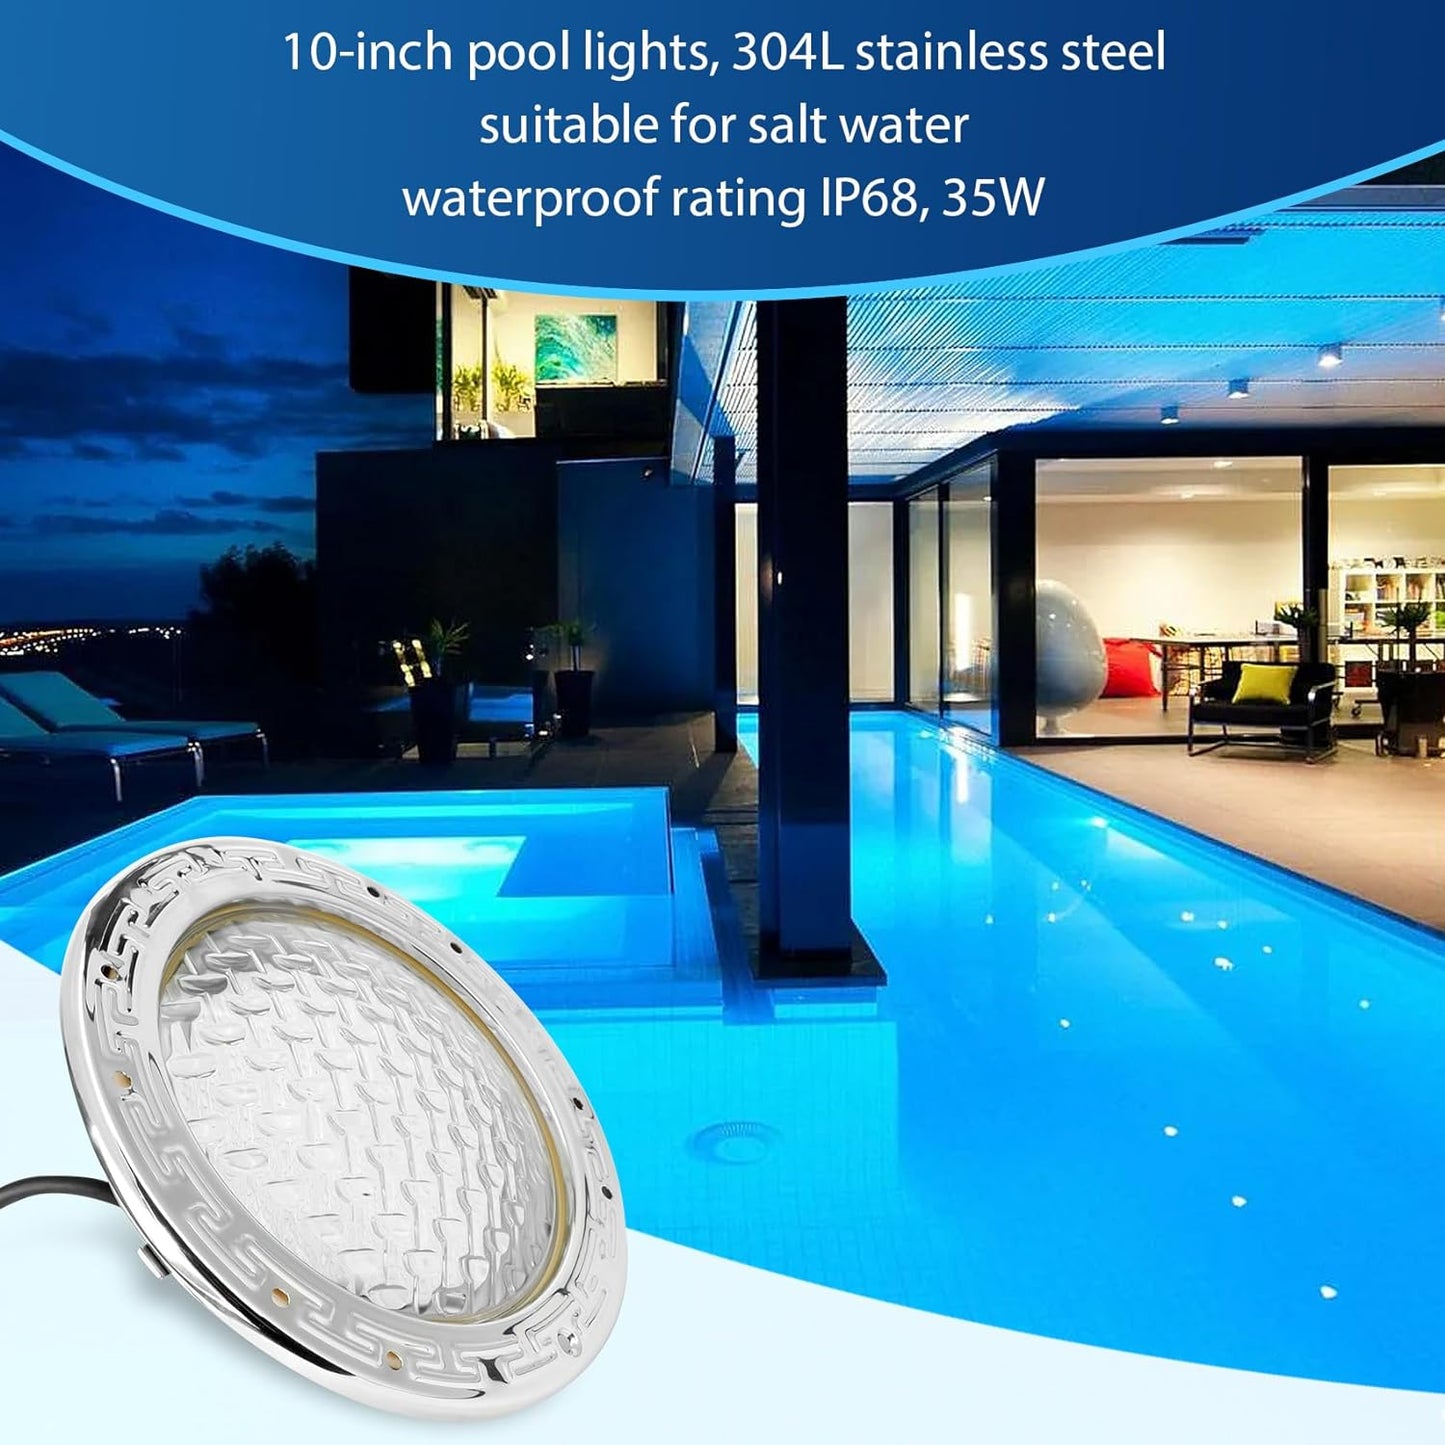 AC12V RGBW Pool Lights for Inground Pool, 50FT LED Pool Lights for Inground Pool, Wall Mount Pool Lights for Inground Pools Waterproof, Full Instructions and Remote Control (50FT)